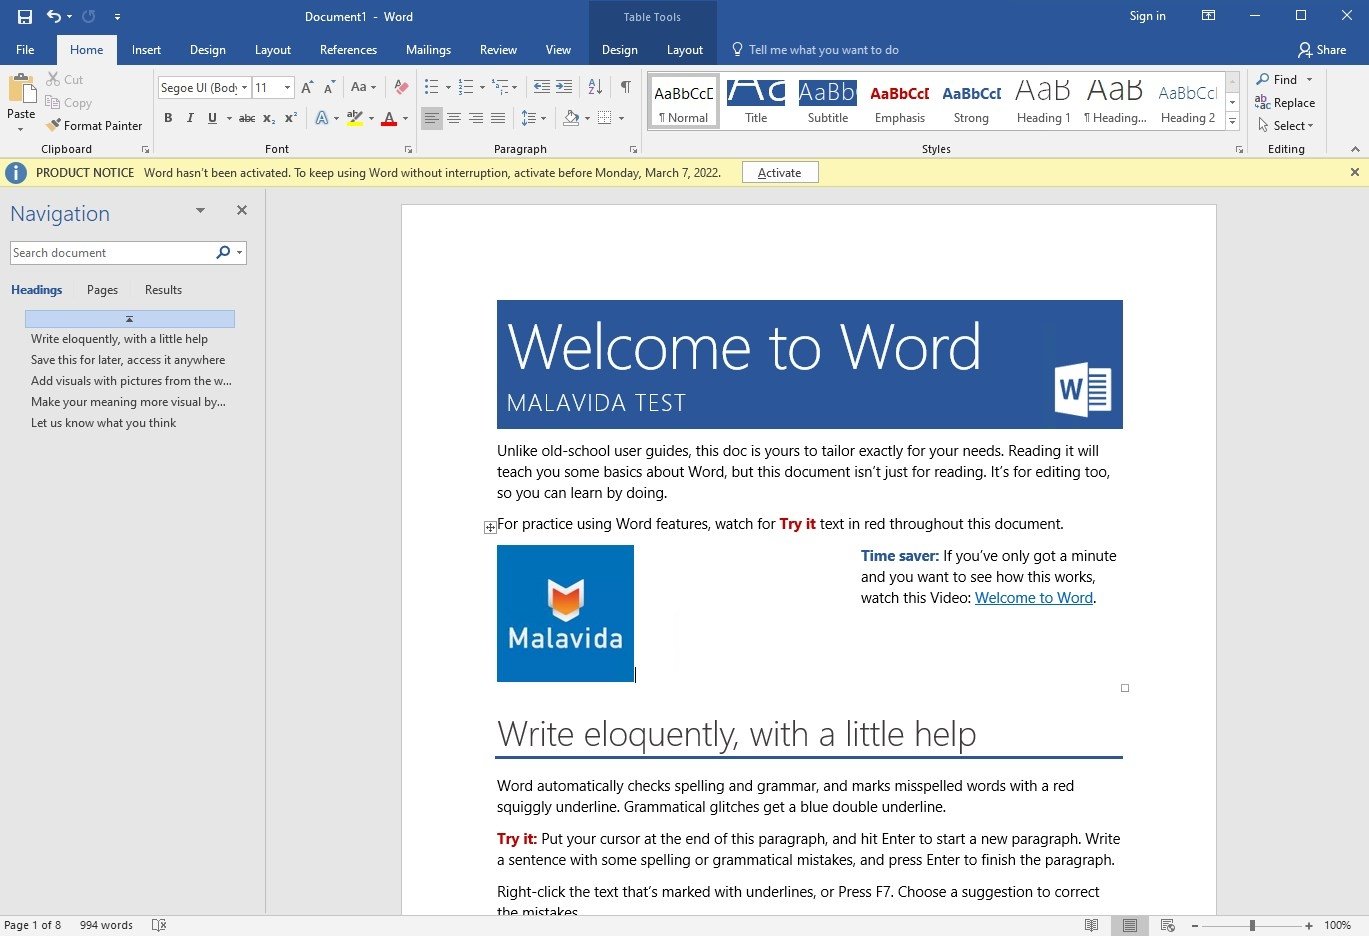 Microsoft office 2016 full version free download for windows 10 download minecraft free full pc